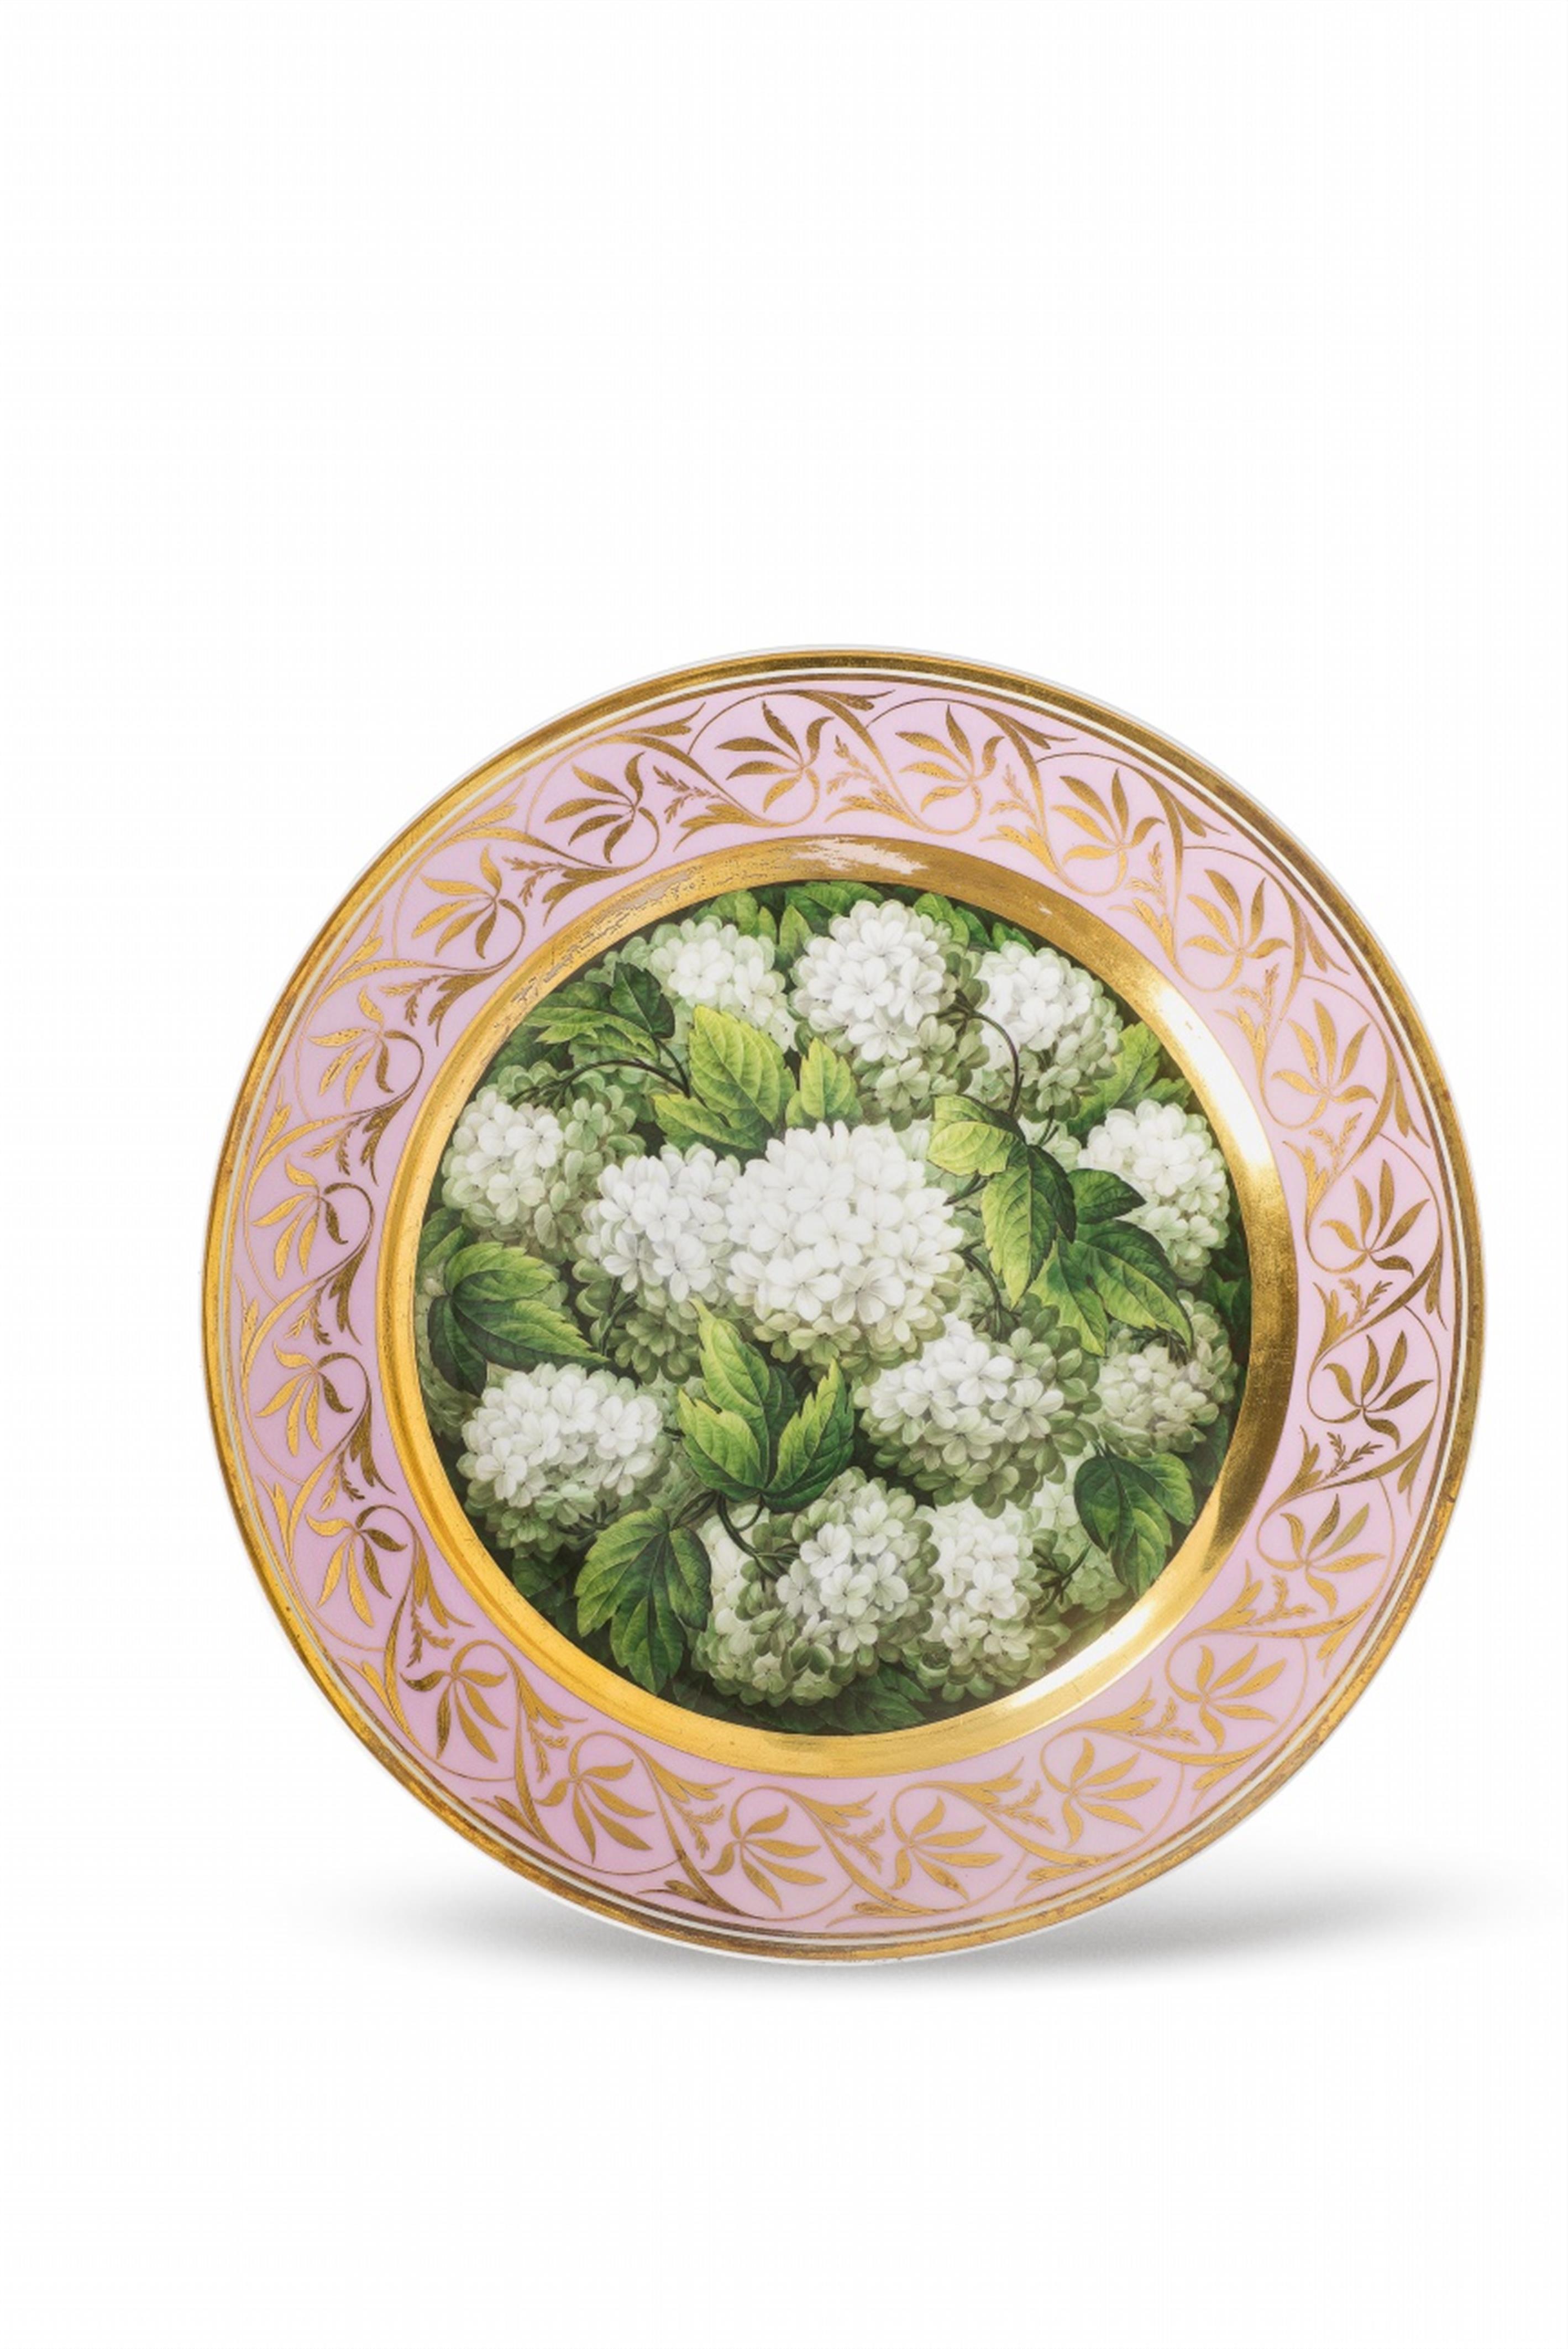 A Berlin KPM porcelain plate with snowball flowers - image-1